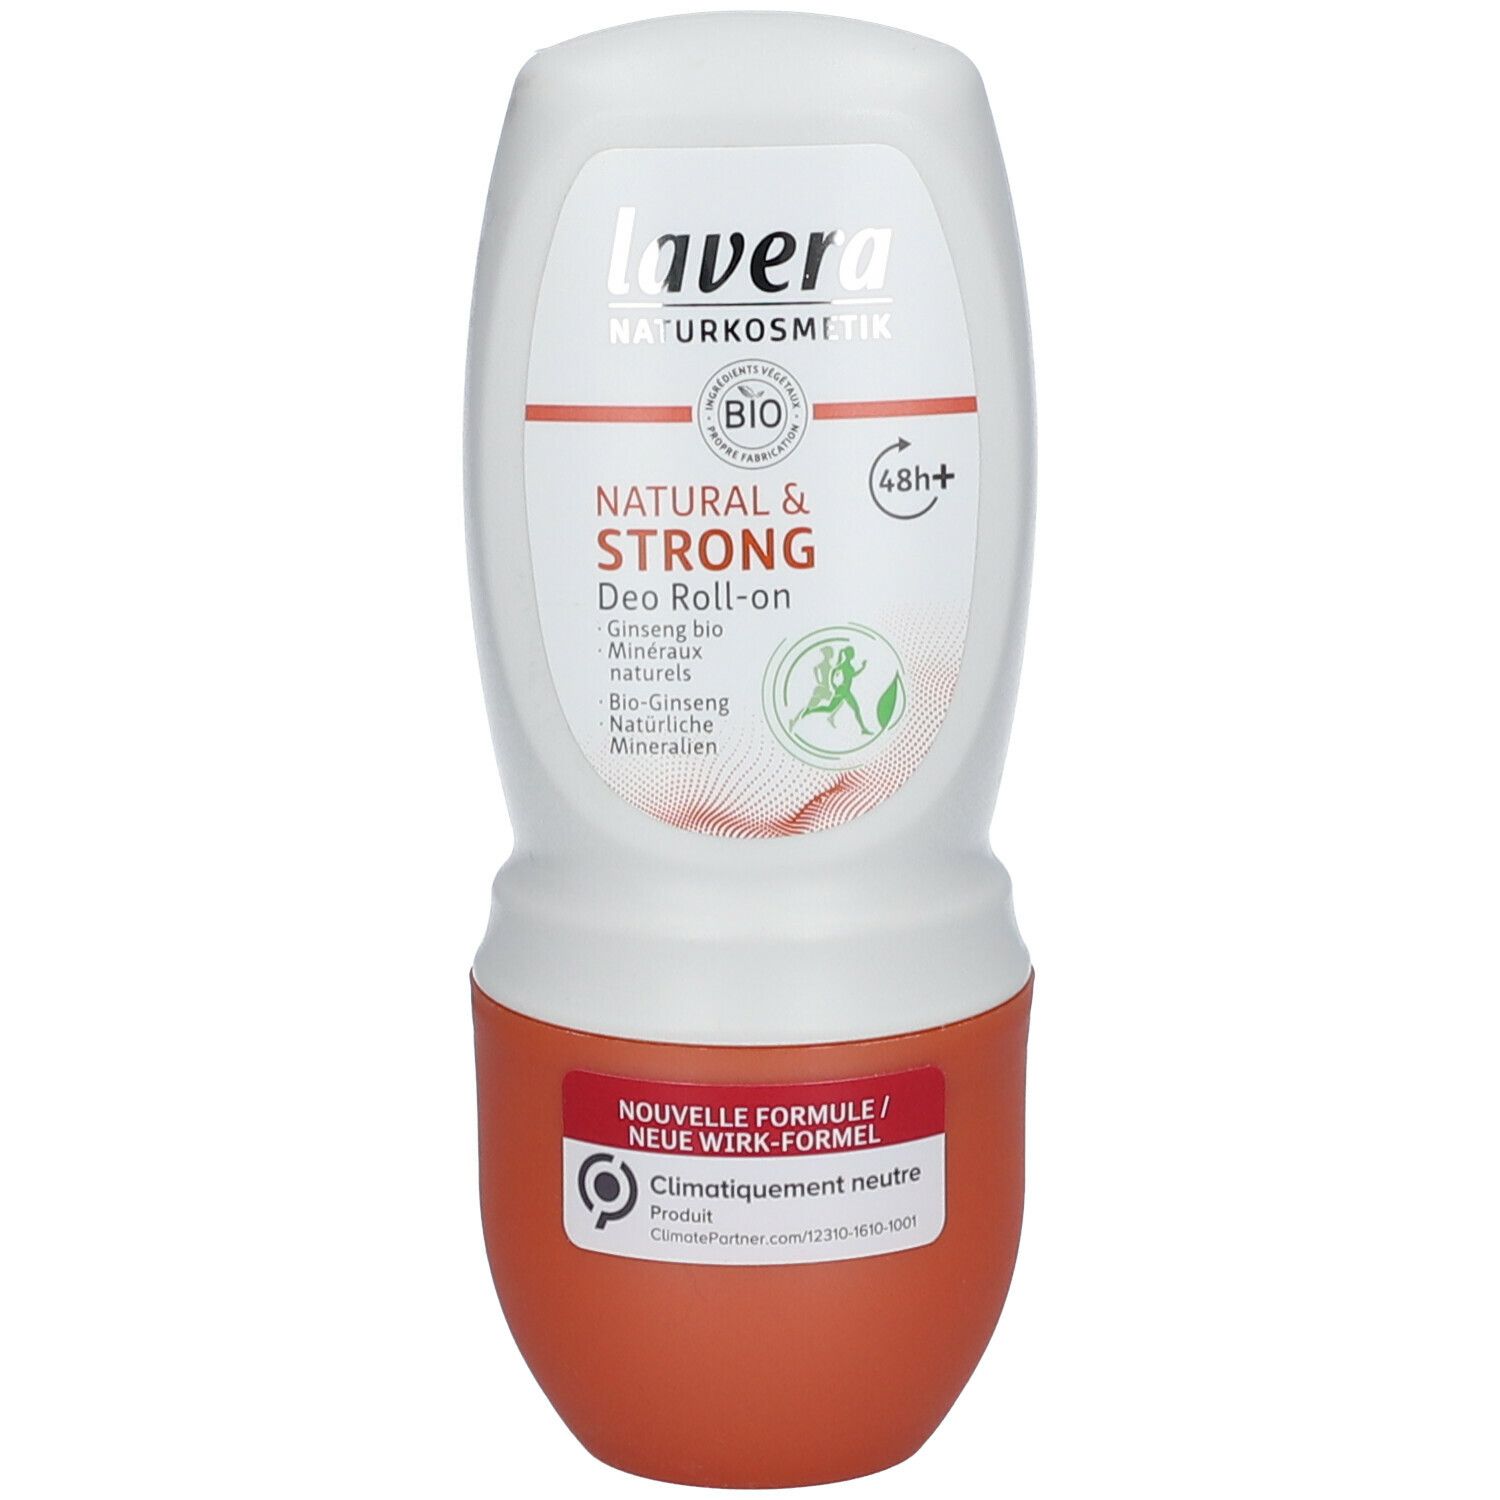 Image of lavera Deo Roll-on NATURAL & STRONG